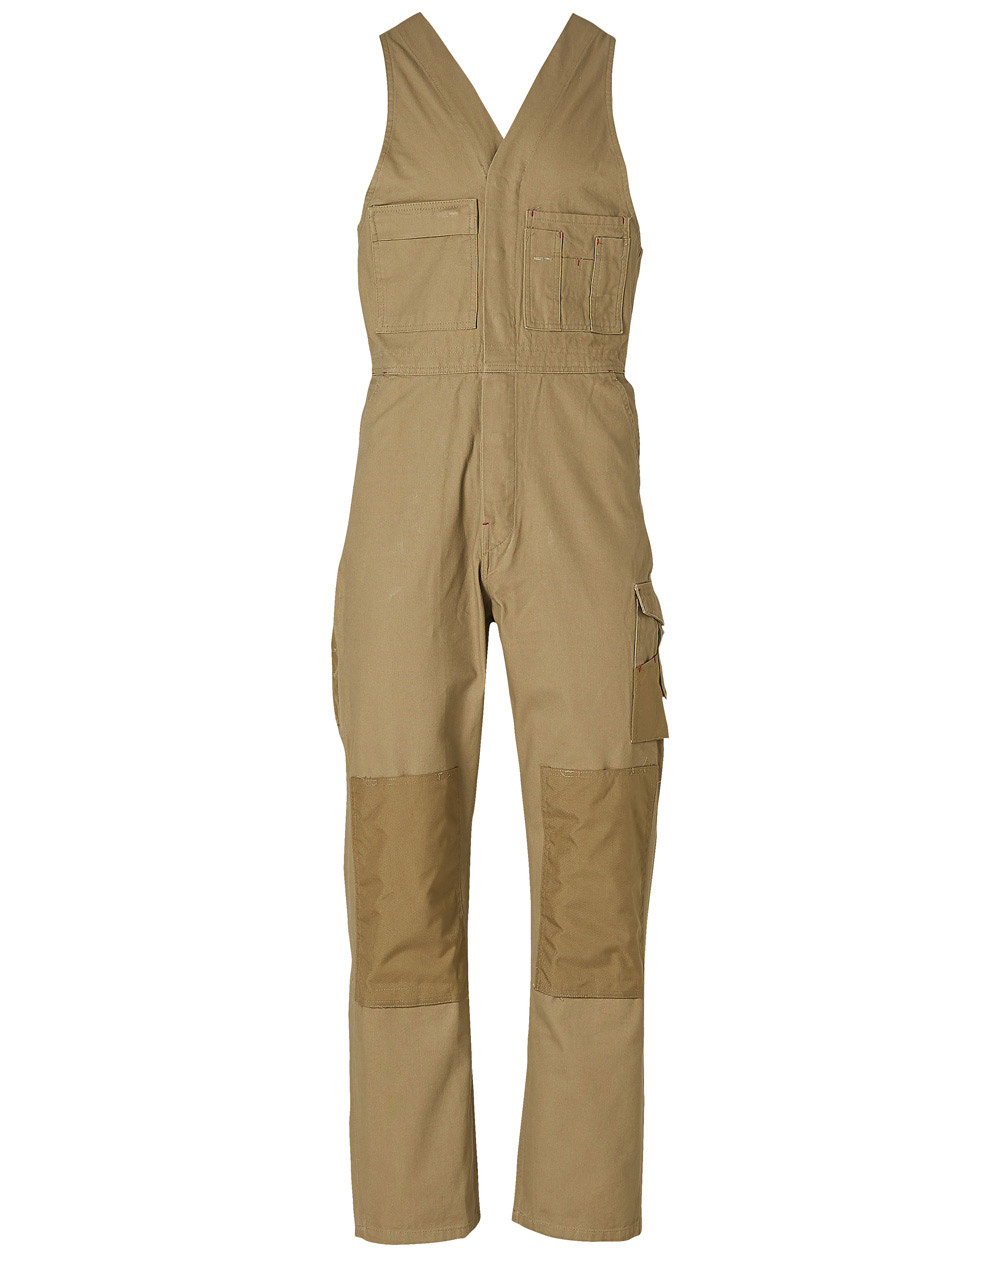 WA04 Men’s DURABLE ACTION BACK OVERALL